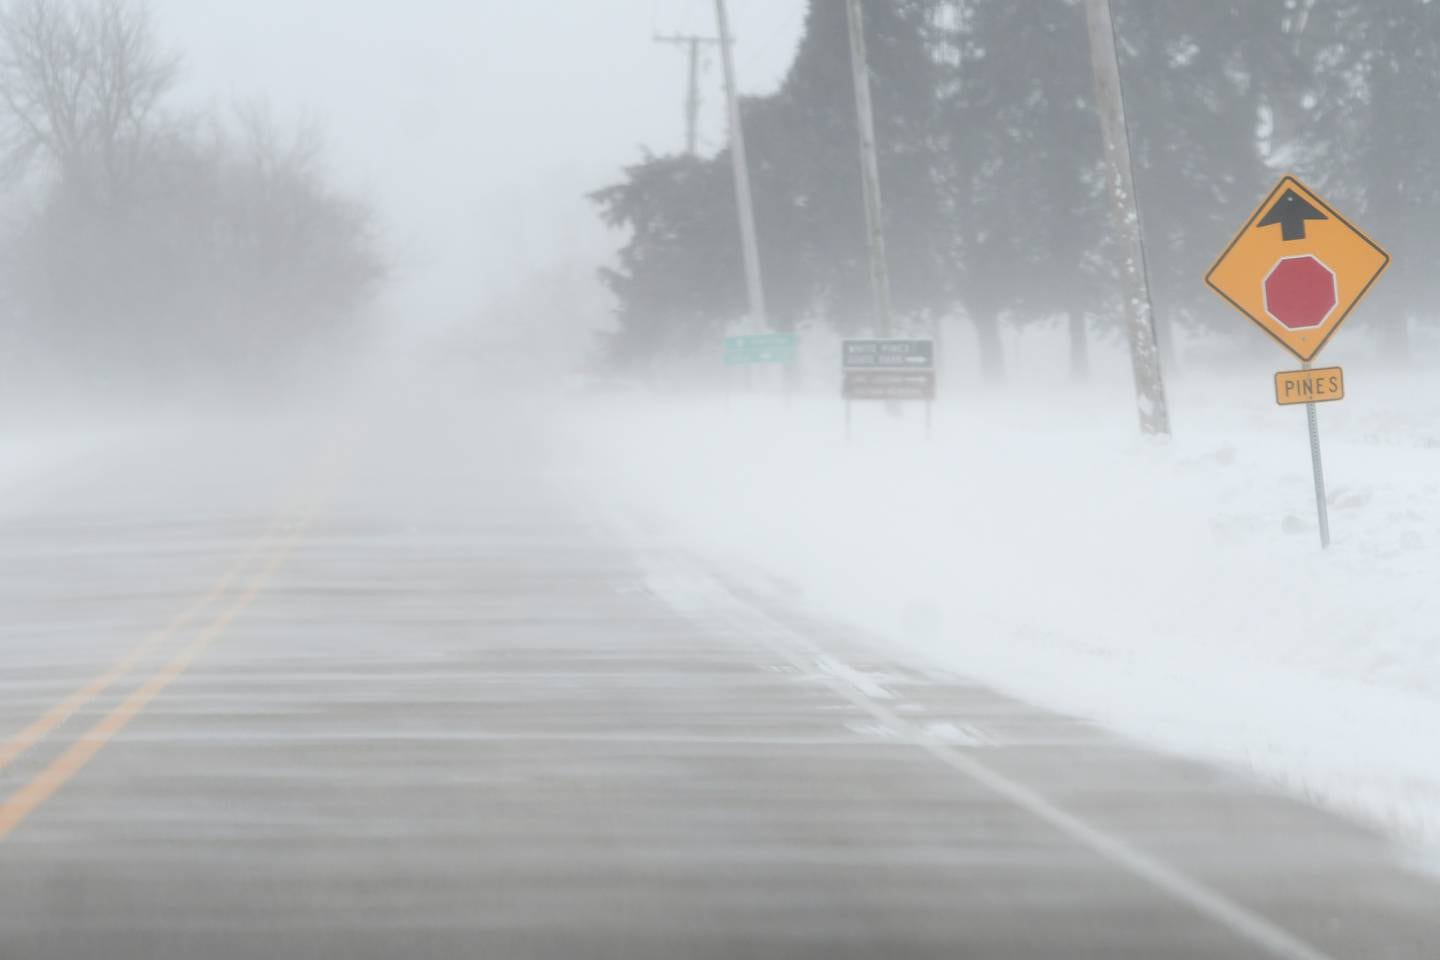 High winds and blowing snow made driving conditions dangerous on Friday  prompting officials to strongly advise motorists not to venture out during Friday's winter storm warning.